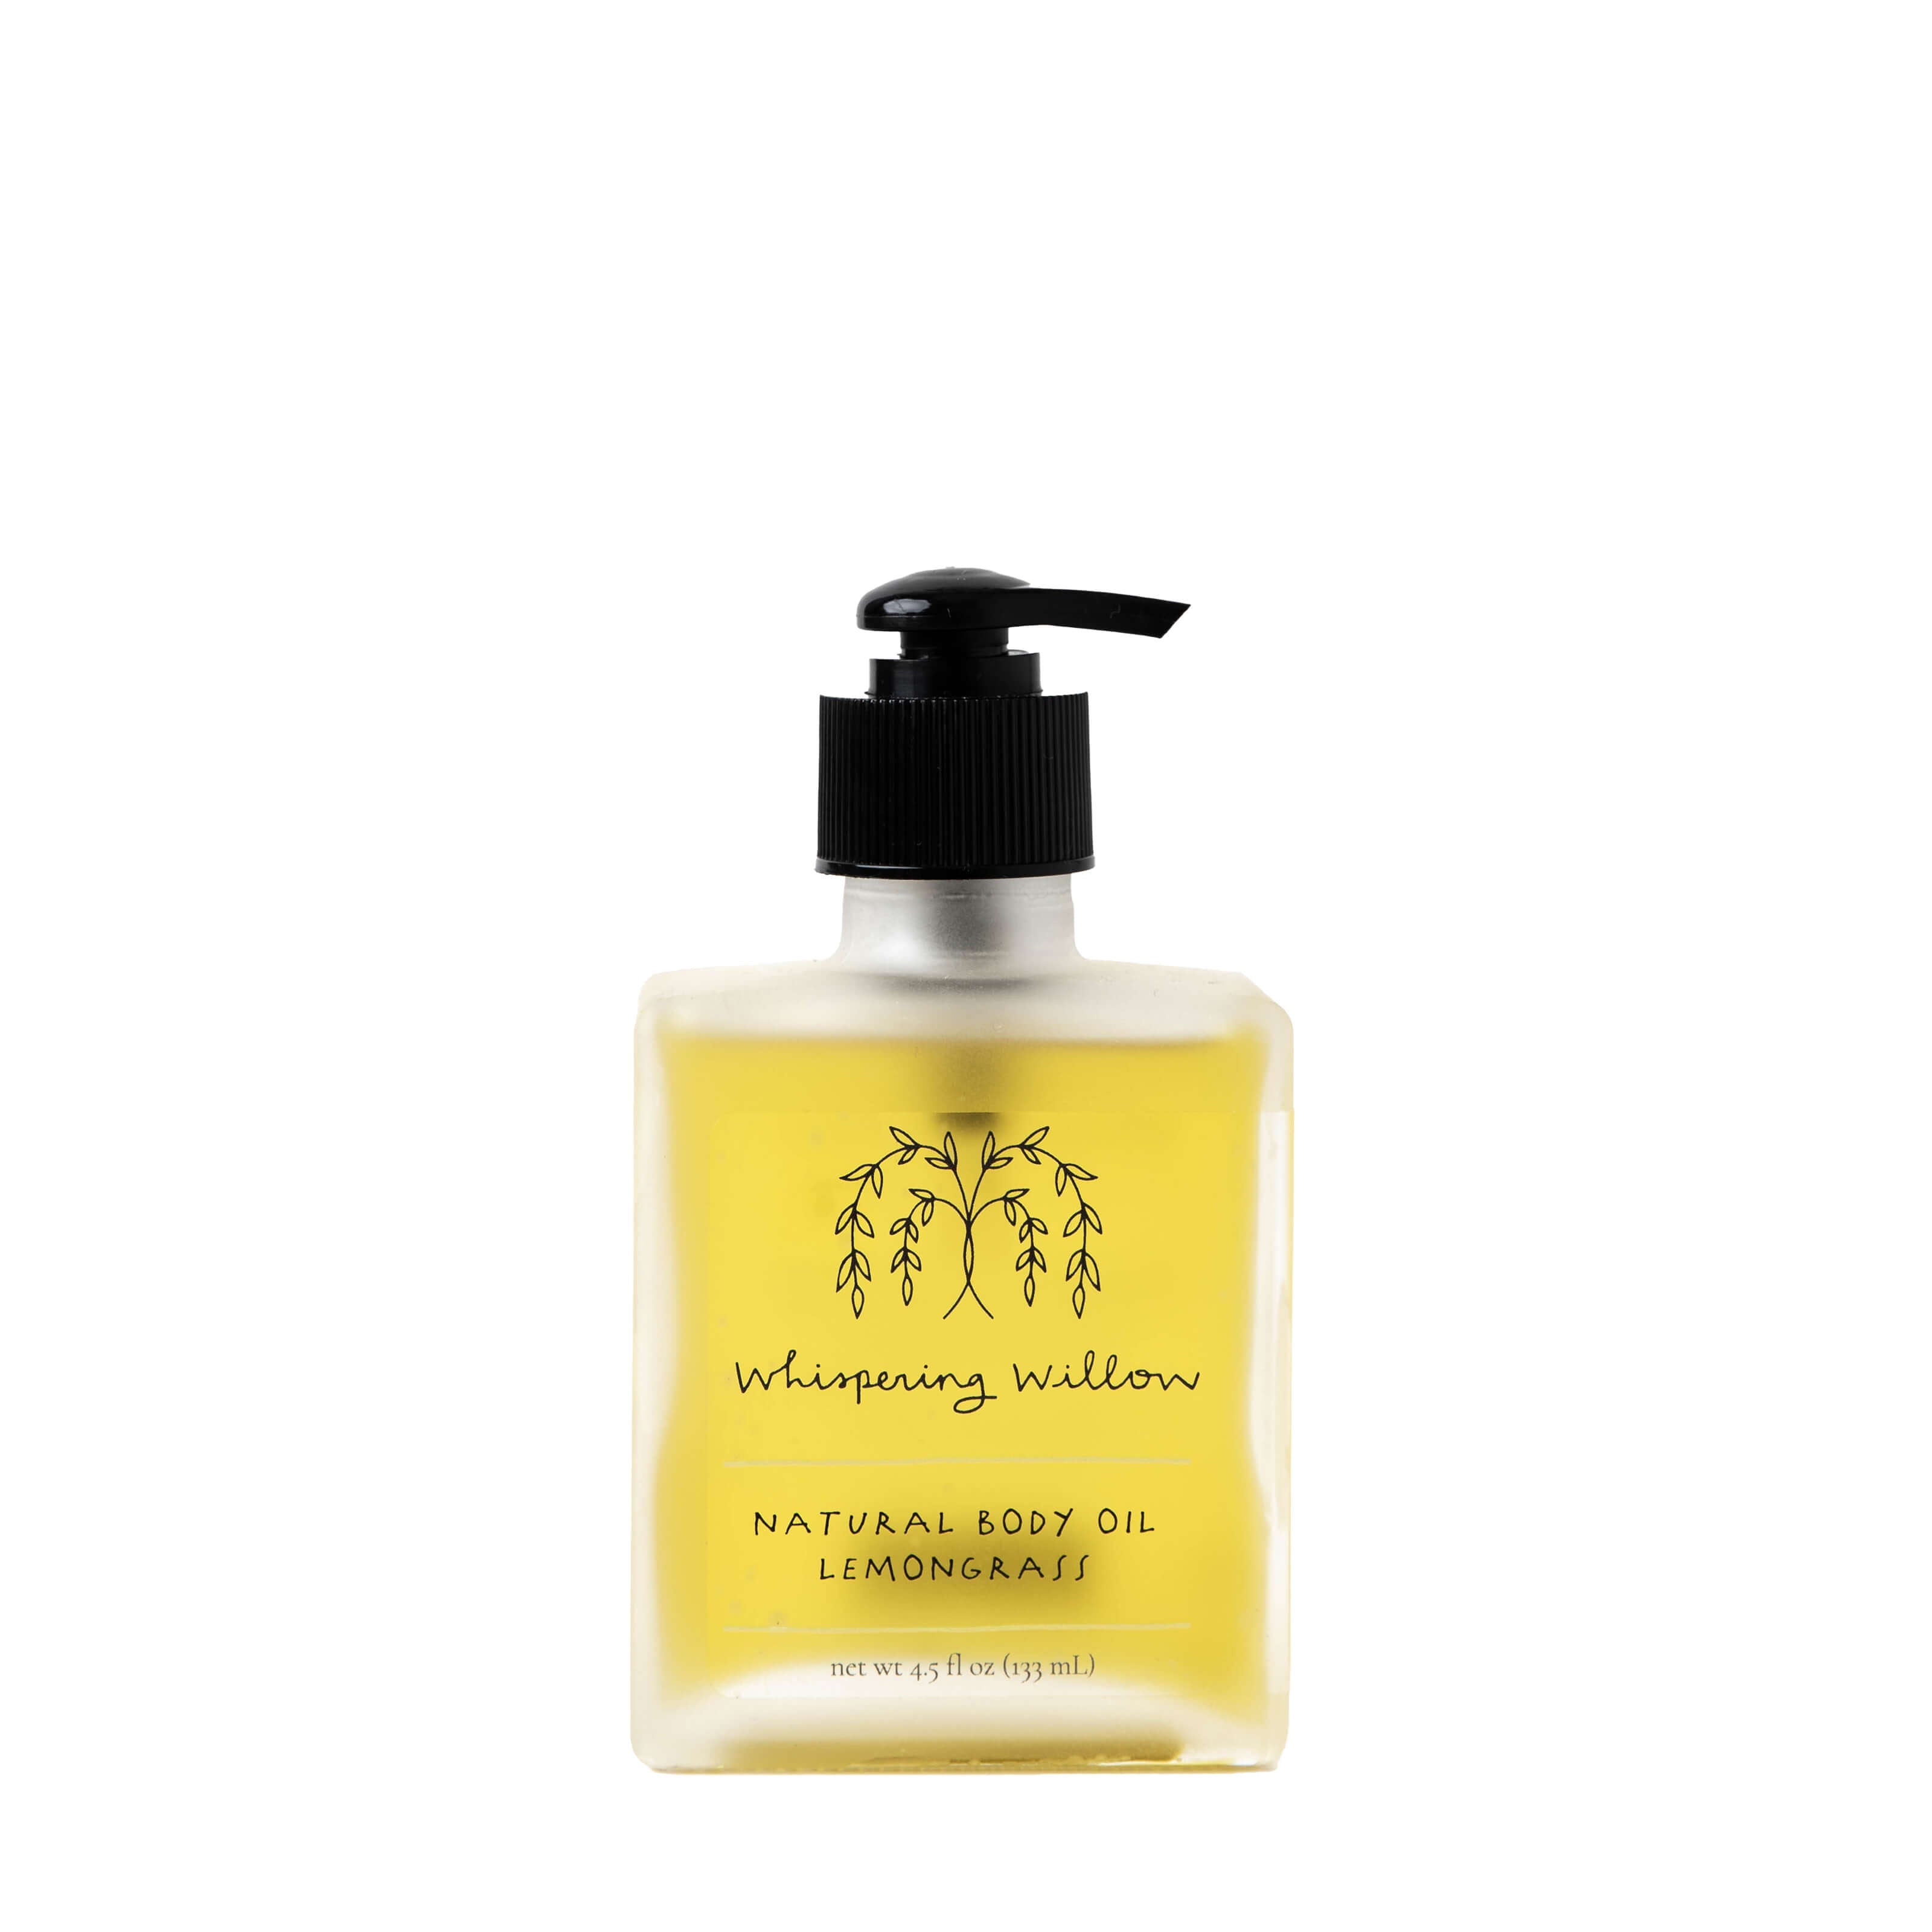 Our lemongrass body oil is a natural, vegan, and cruelty-free way to soothe, refresh, and nourish your skin. Made with a blend of essential oils, this oil is perfect for relieving muscle pain, promoting relaxation, and keeping your skin hydrated.